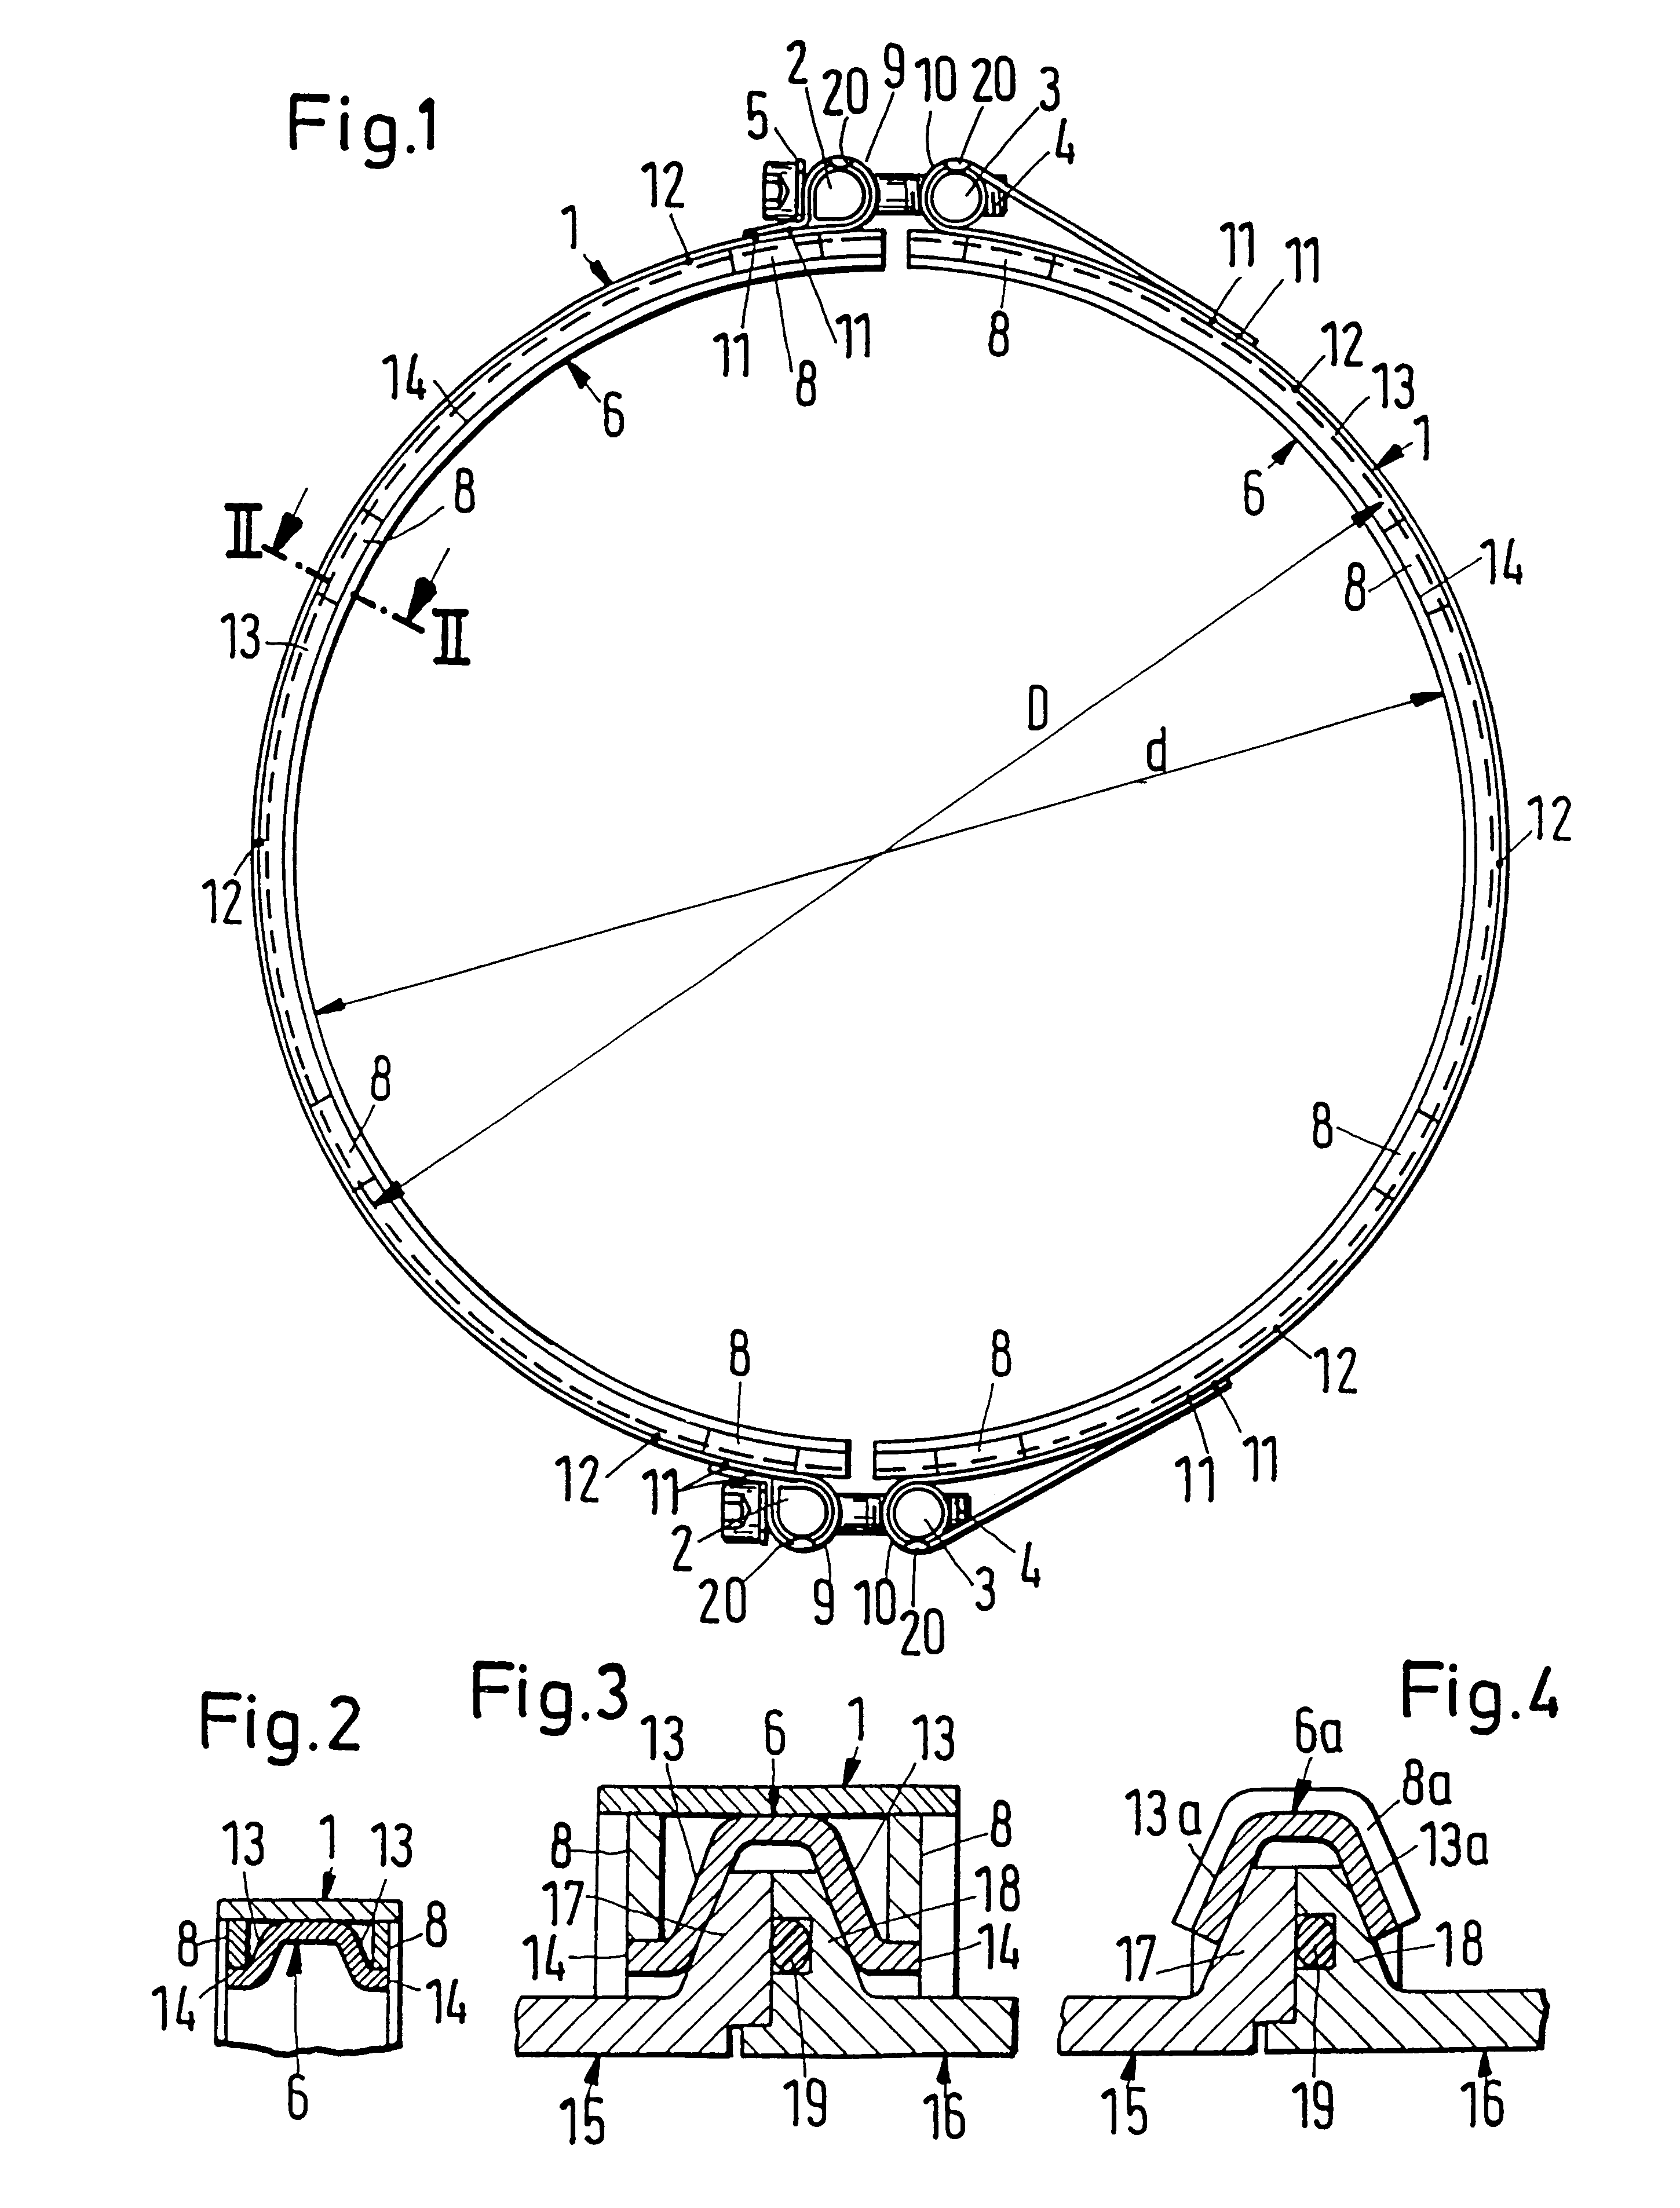 Profile clamp and method for manufacturing a profile clamp